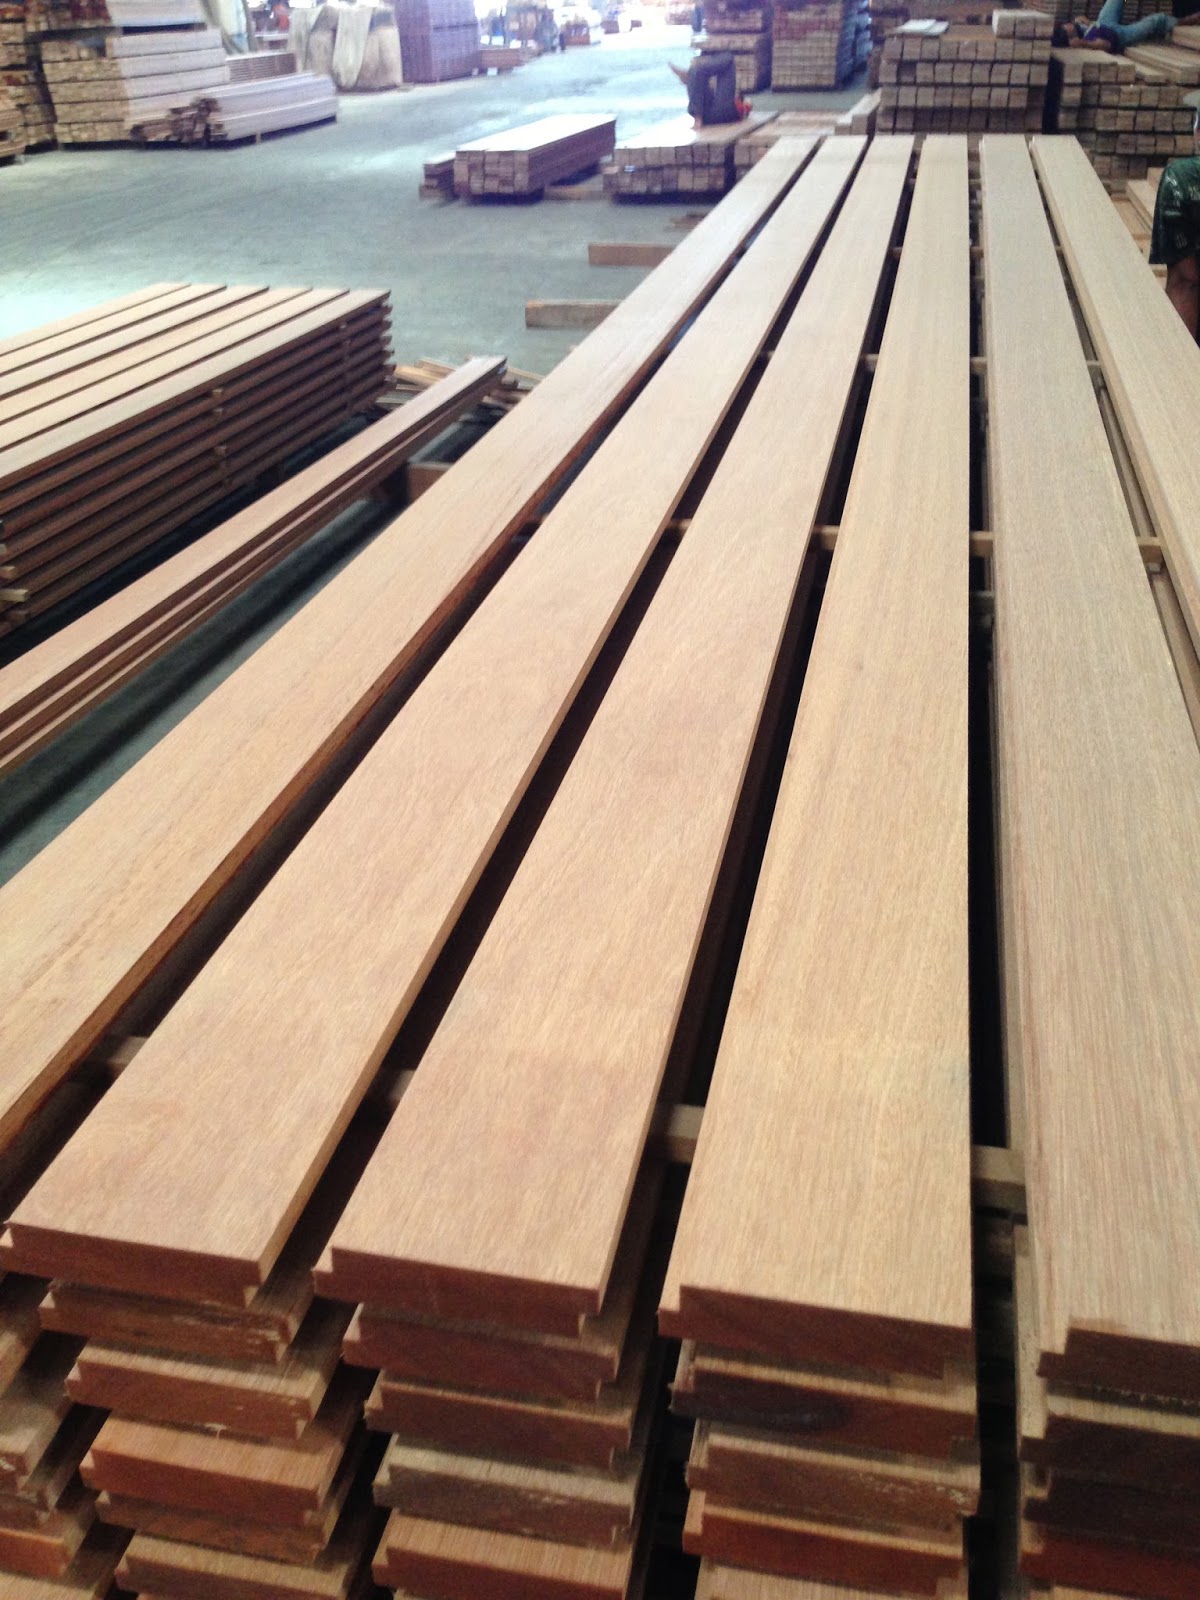 WOOD OUR PRODUCTS DECKING BANGKIRAI AND ULIN LOADING IN 2022 